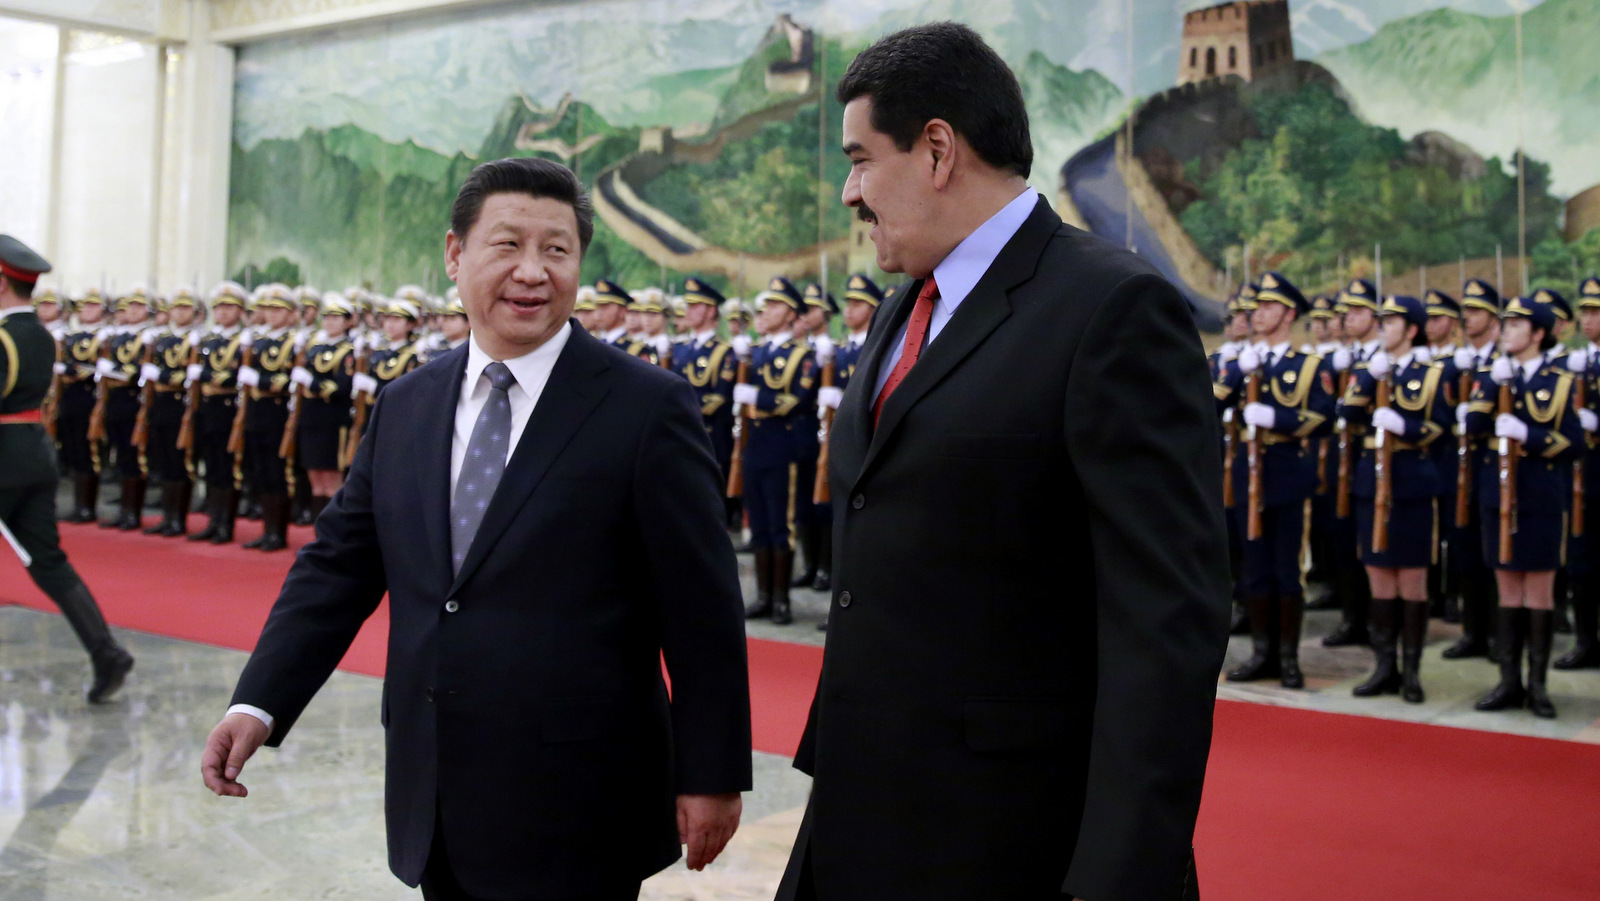 Venezuela's President Nicolas Maduro, right, chats with Chinese President Xi Jinping after a welcome ceremony at the Great Hall of the People in Beijing, China Wednesday, Jan. 7, 2015. (AP/Andy Wong)